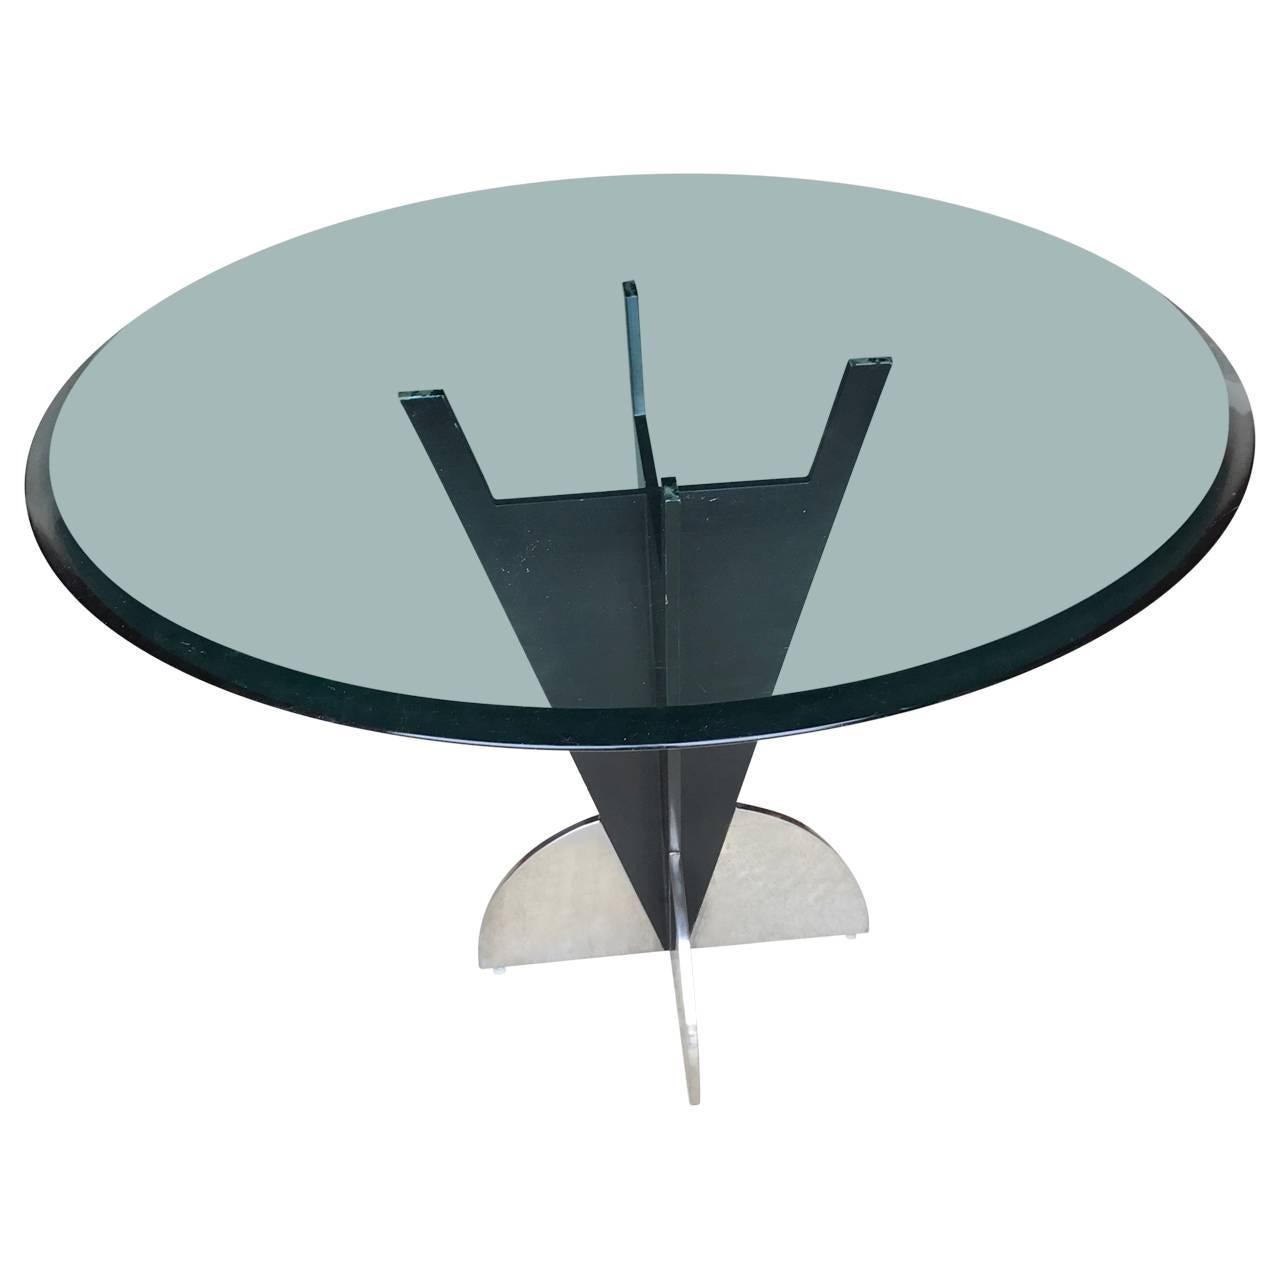 Beveled American Modern Steel Dining Table With Round Tinted Glass Top 